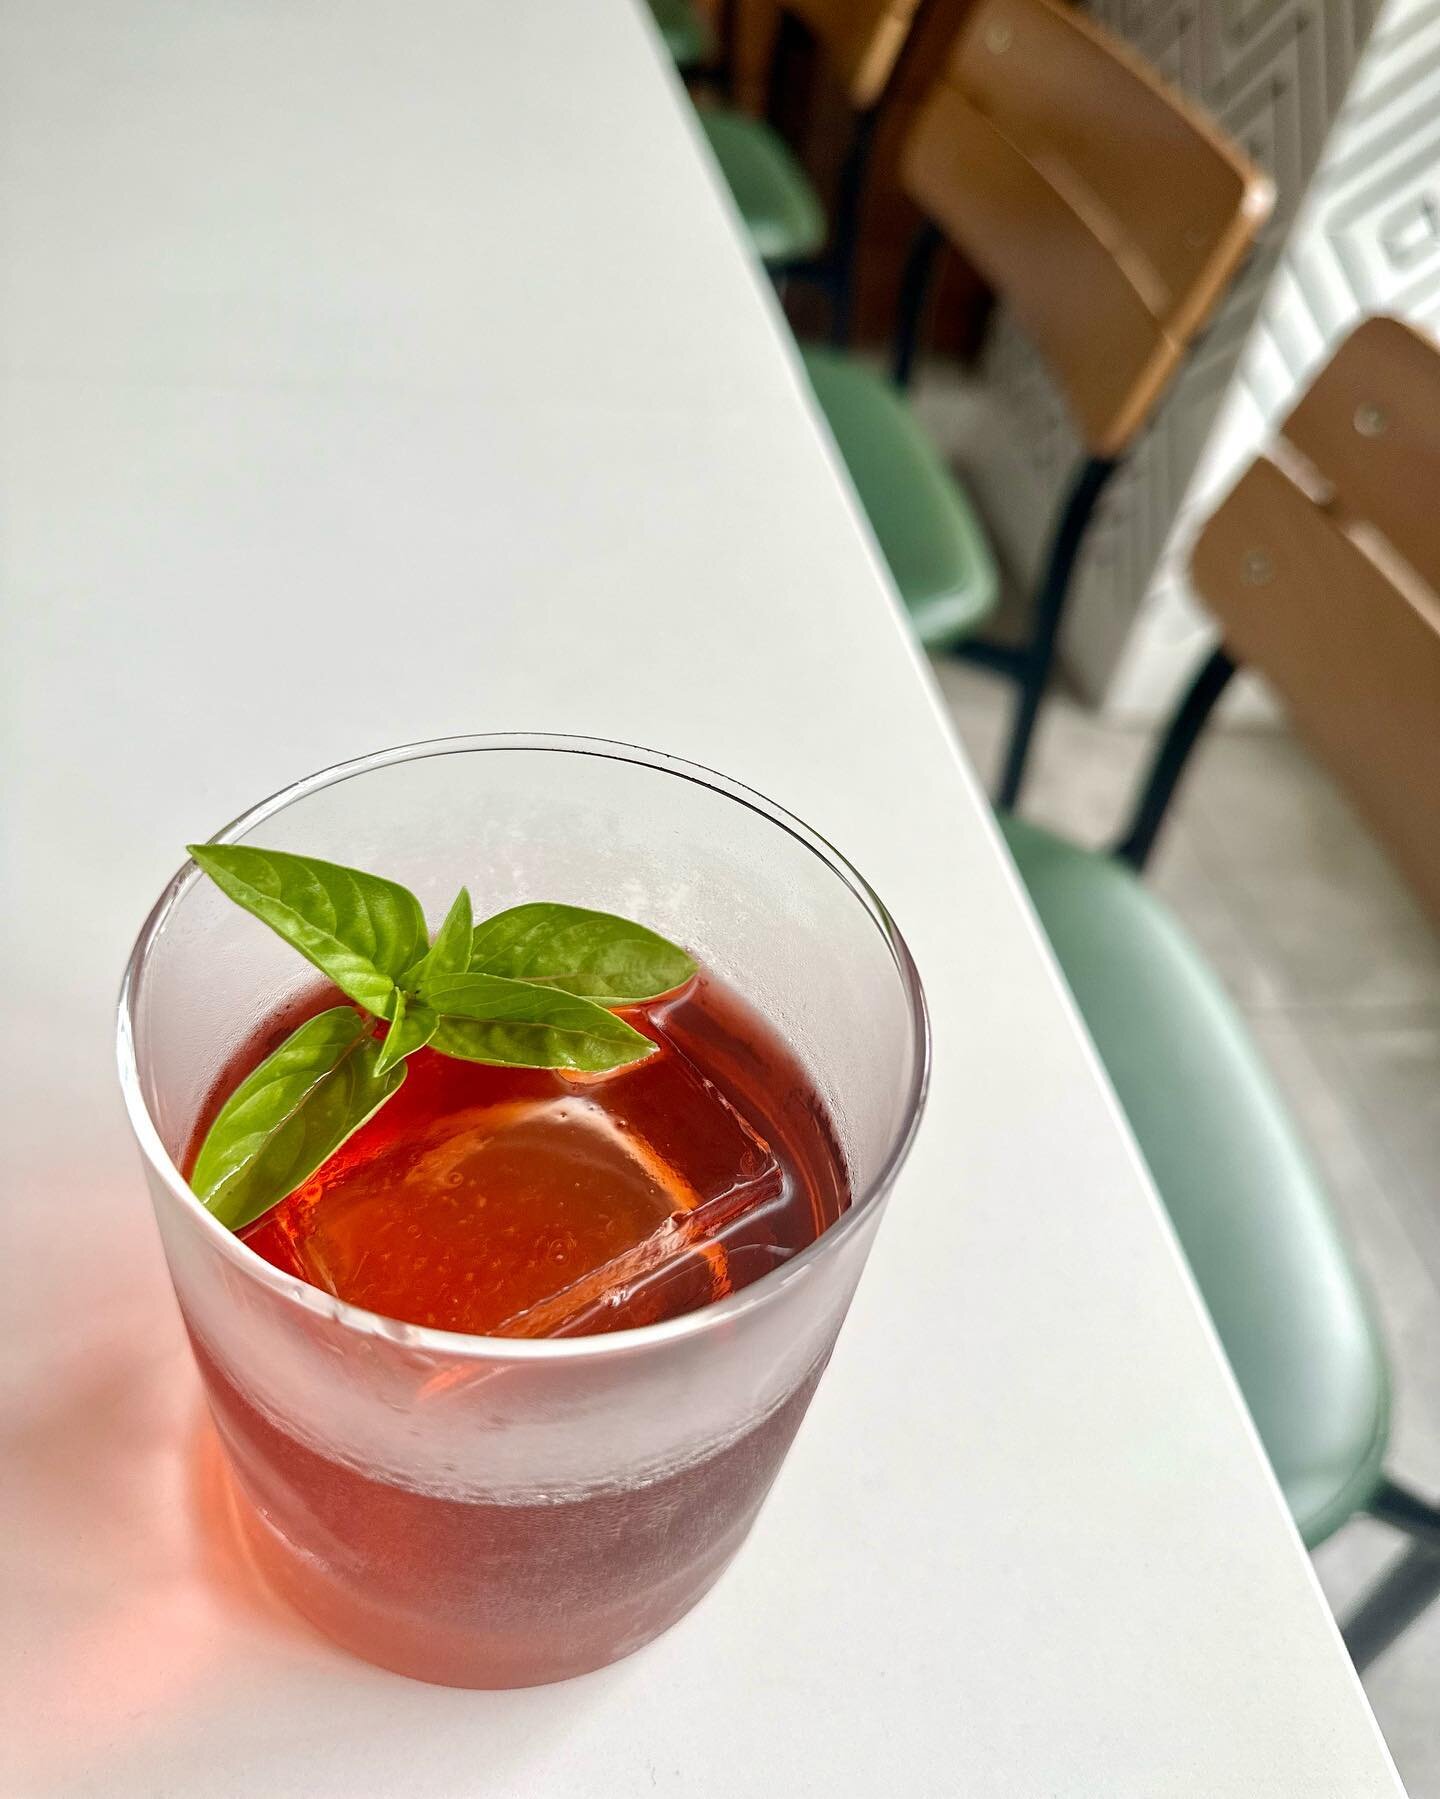 NEGRONI WEEEEEEEEK! 
This year is in support of Slow Foods, an organization working to protect cultural and biological diversity while advocating for more just and equitable food policies globally. Stop by Tonight - Sunday to try out our Negroni riff